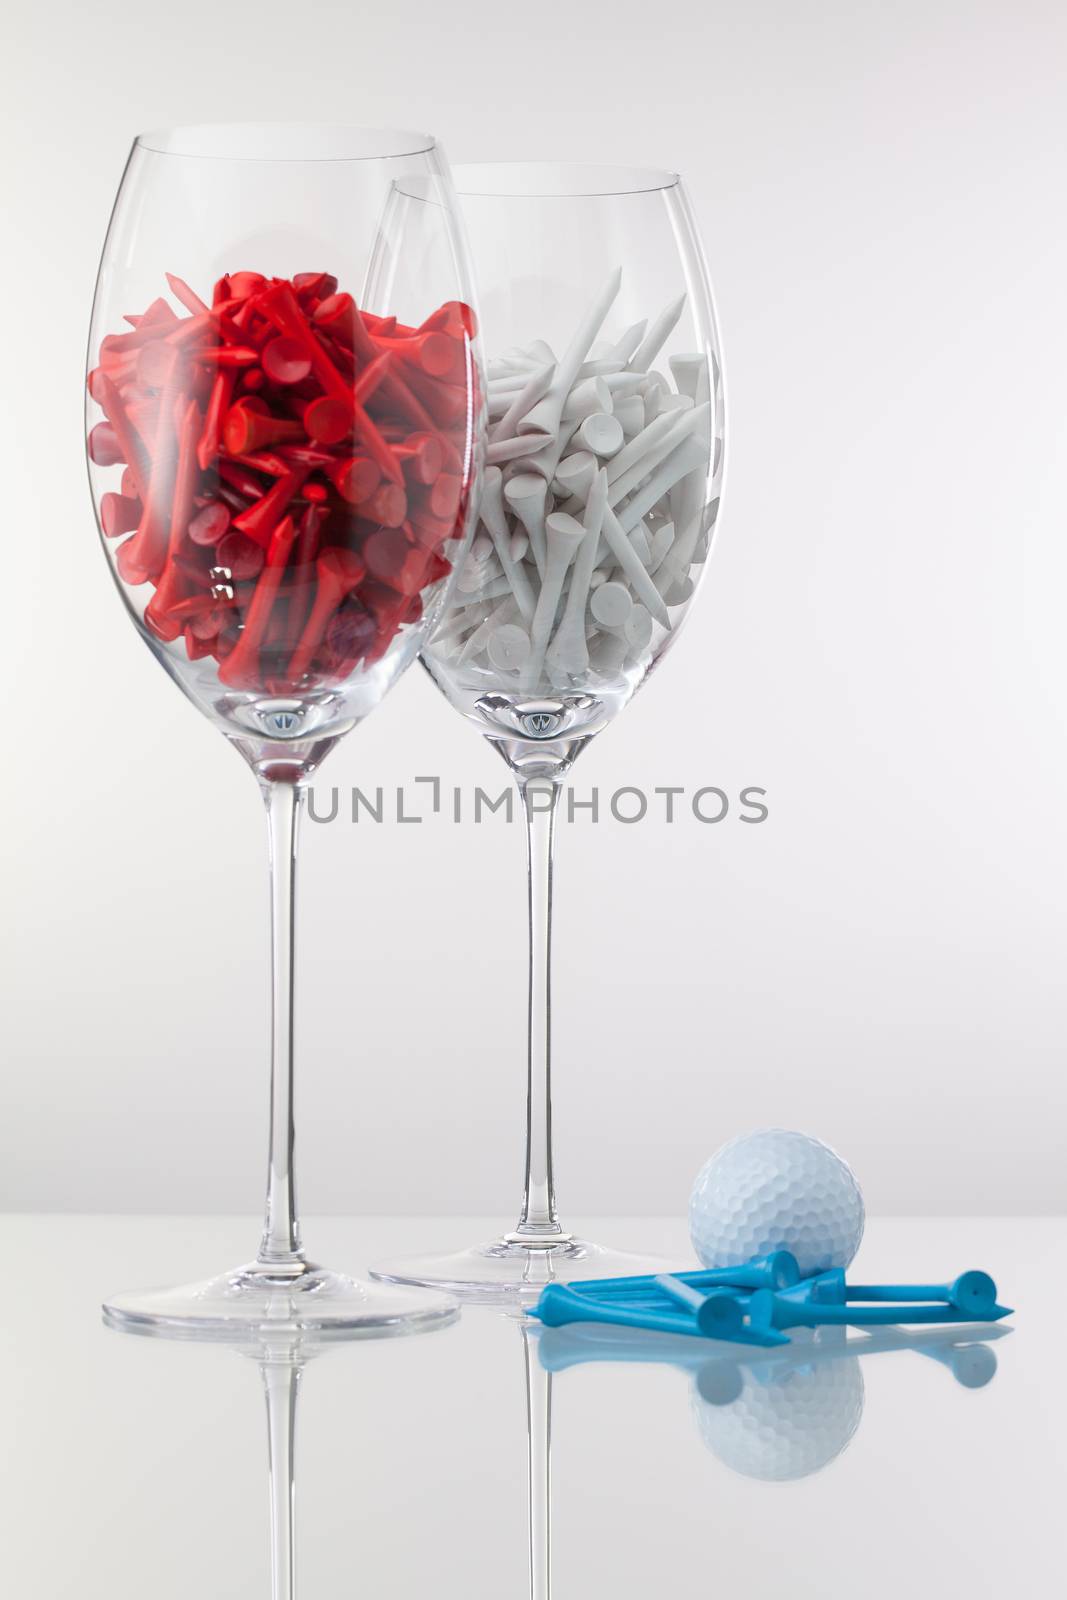 Two glasses of wine and golf equipments on the white background